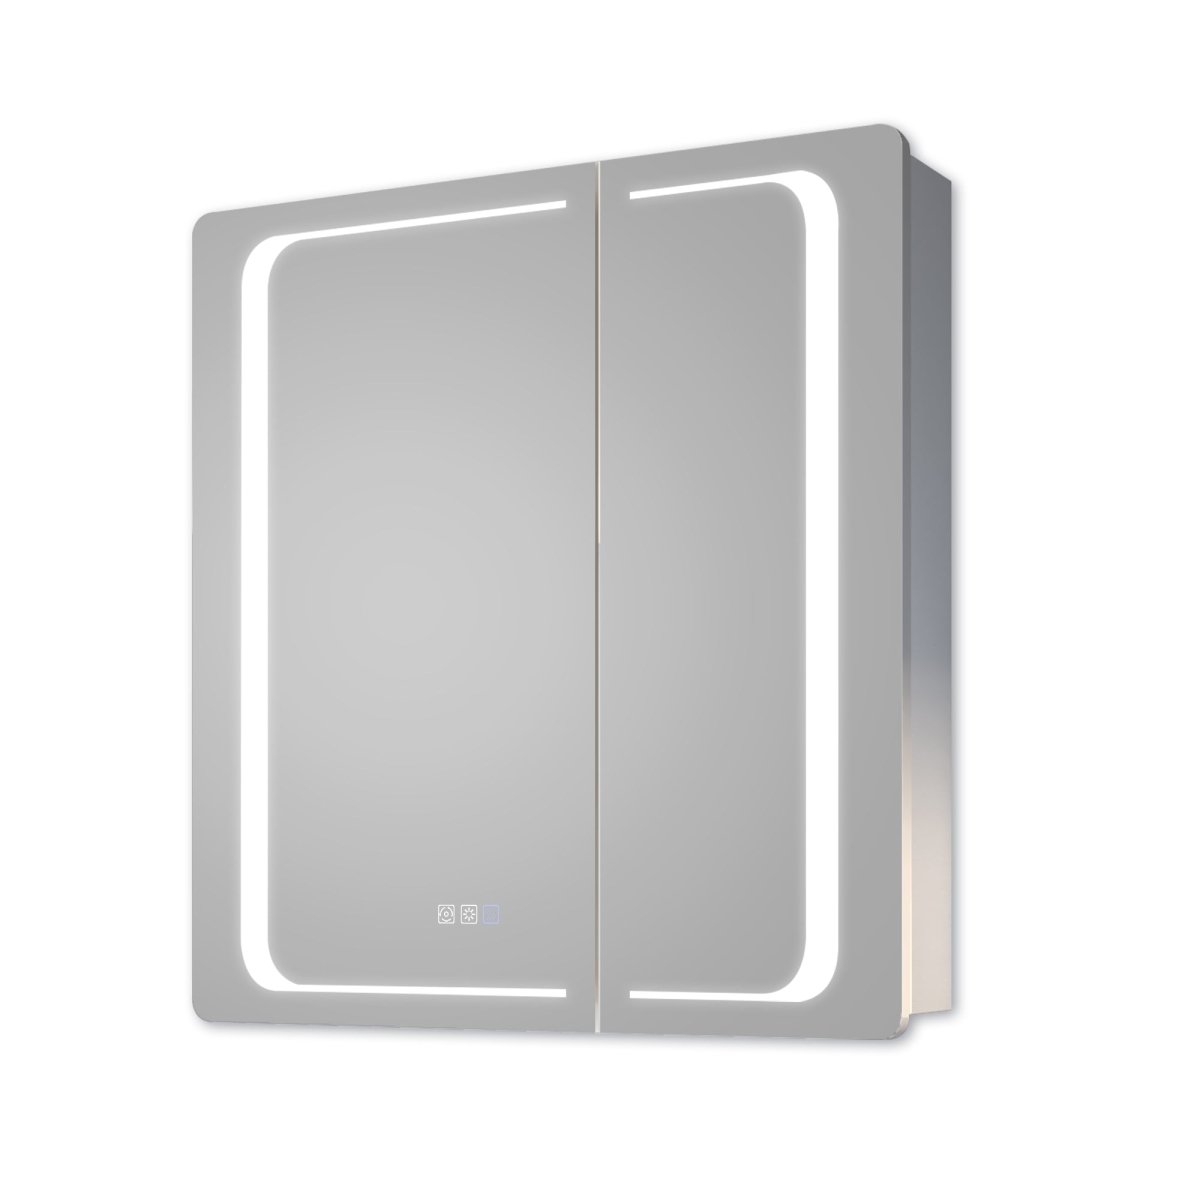 ExBrite 30" W x 32" H LED Lighted Bathroom Medicine Cabinet with Mirror Recessed or Surface Mounted LED Medicine Cabinet - ExBriteUSA